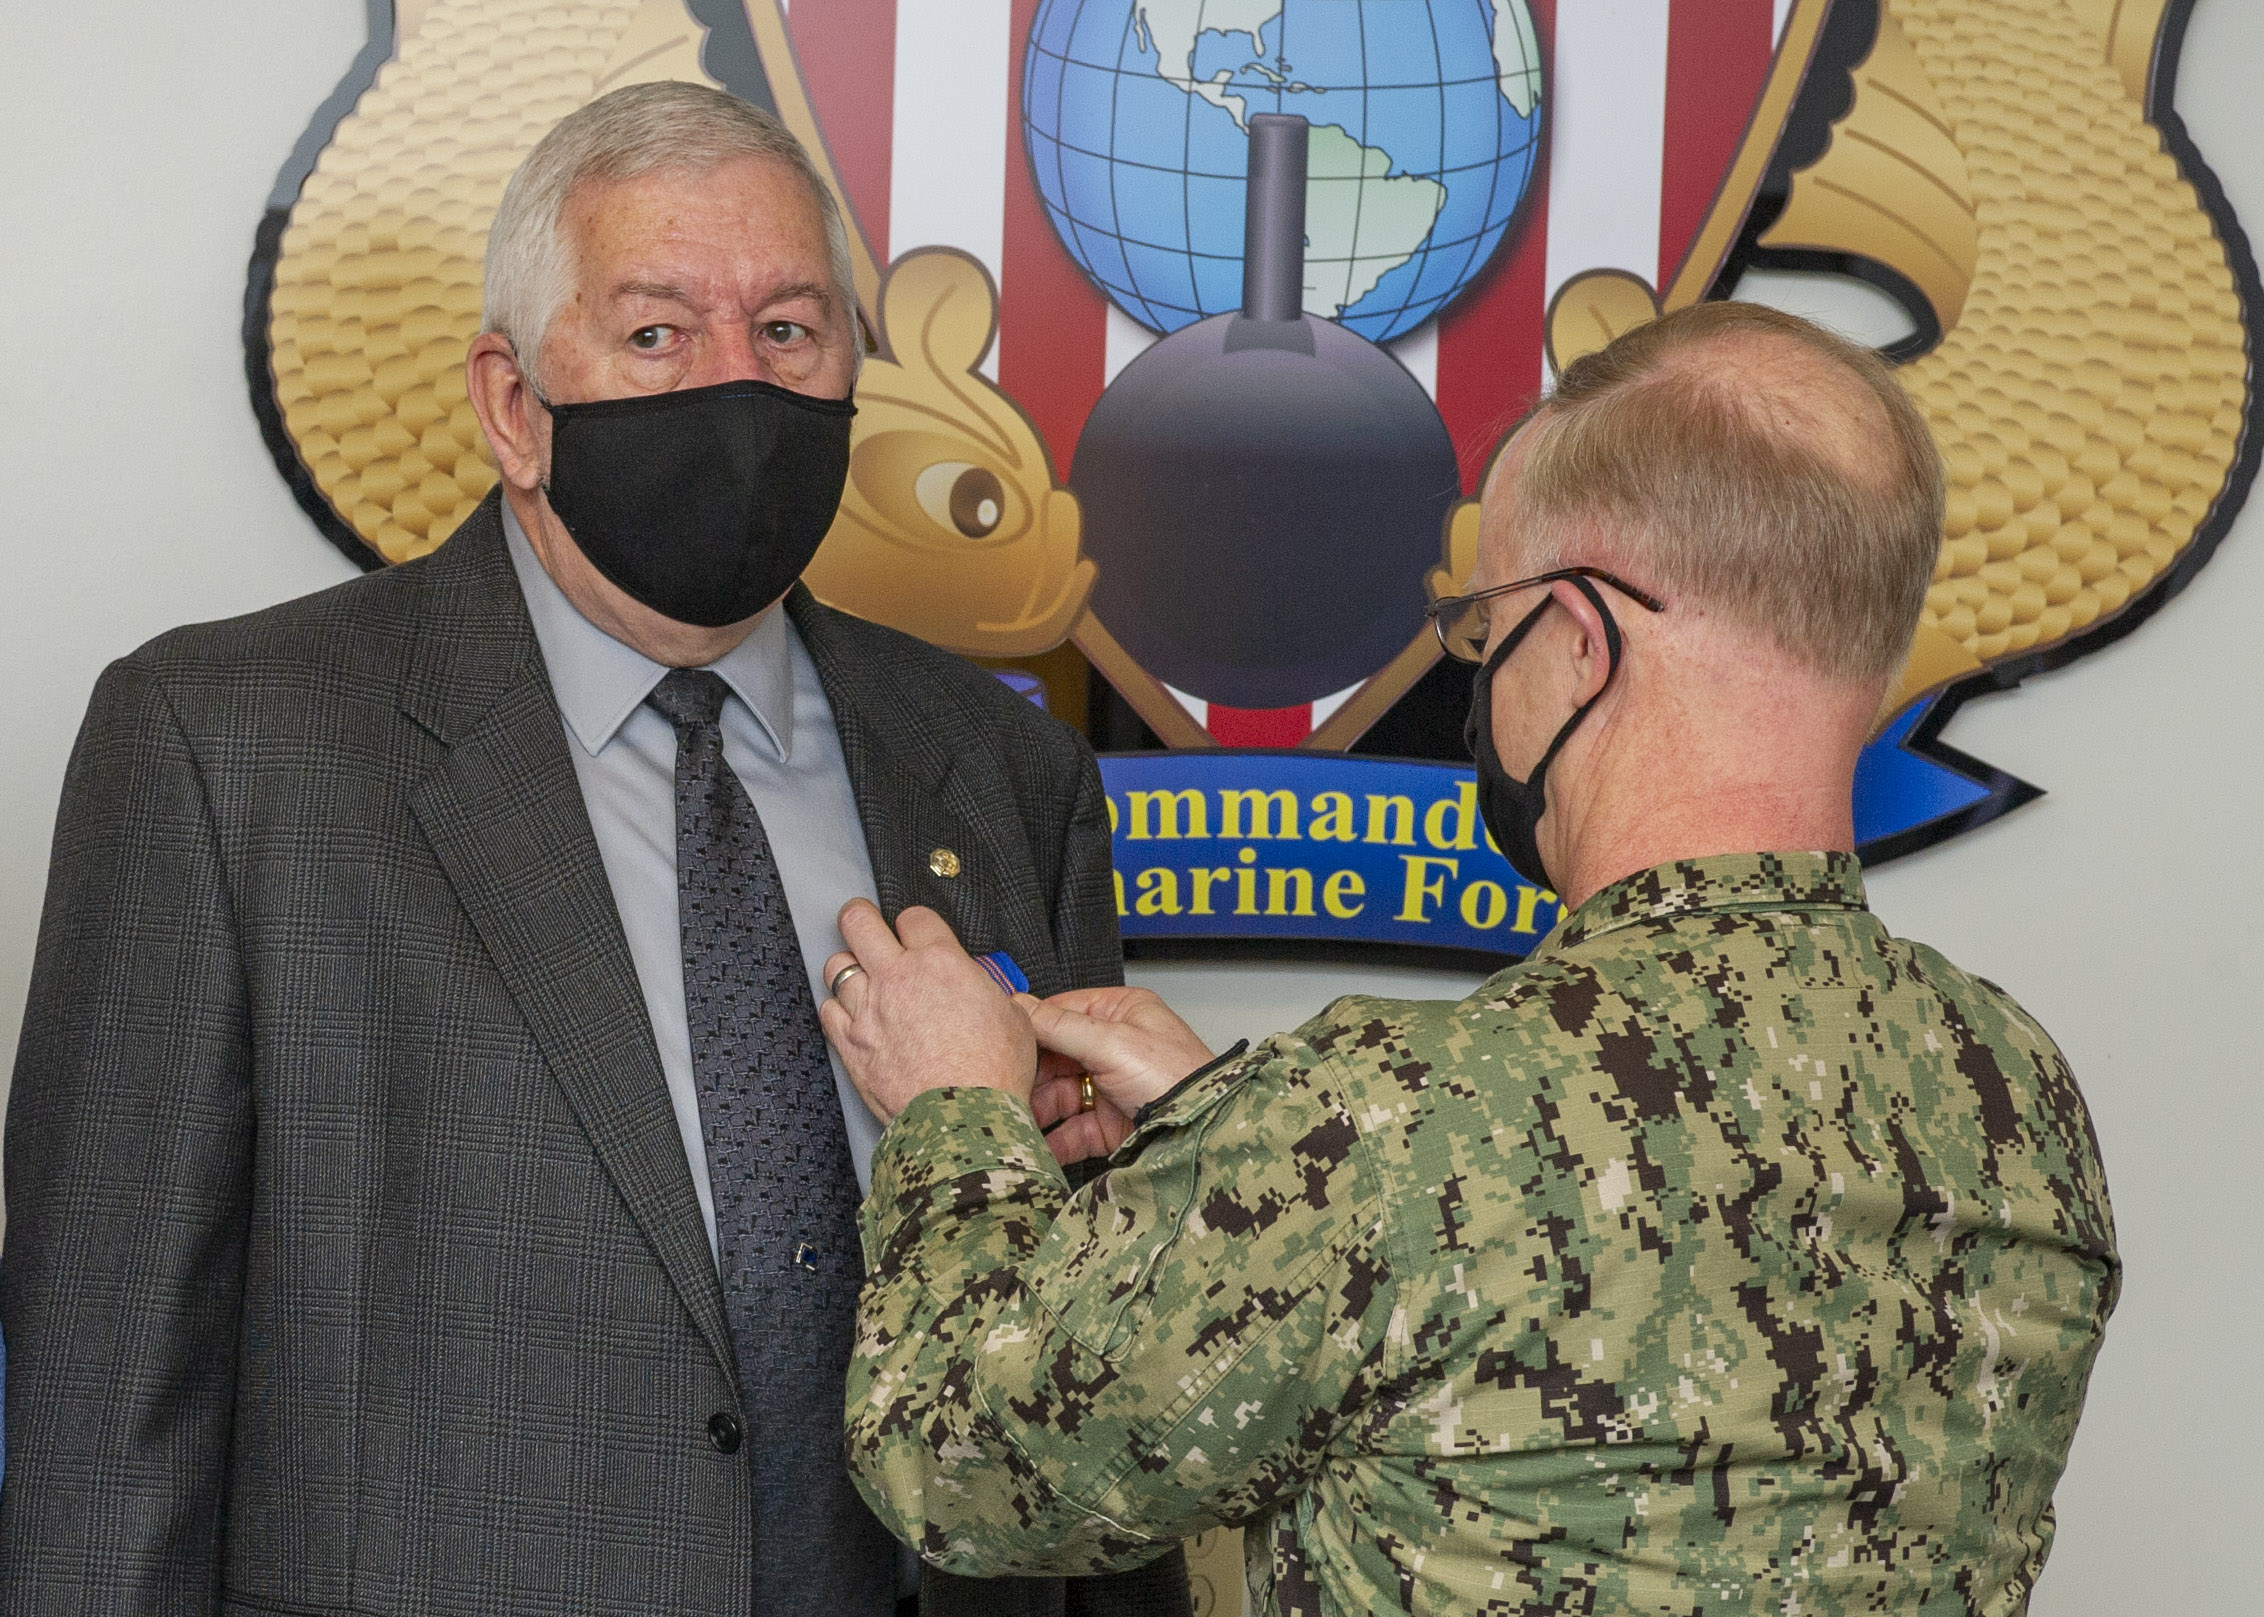 Vice Adm. Daryl Caudle, right, commander, Submarine Forces, pins the civilian of the year award on Robert Tayman